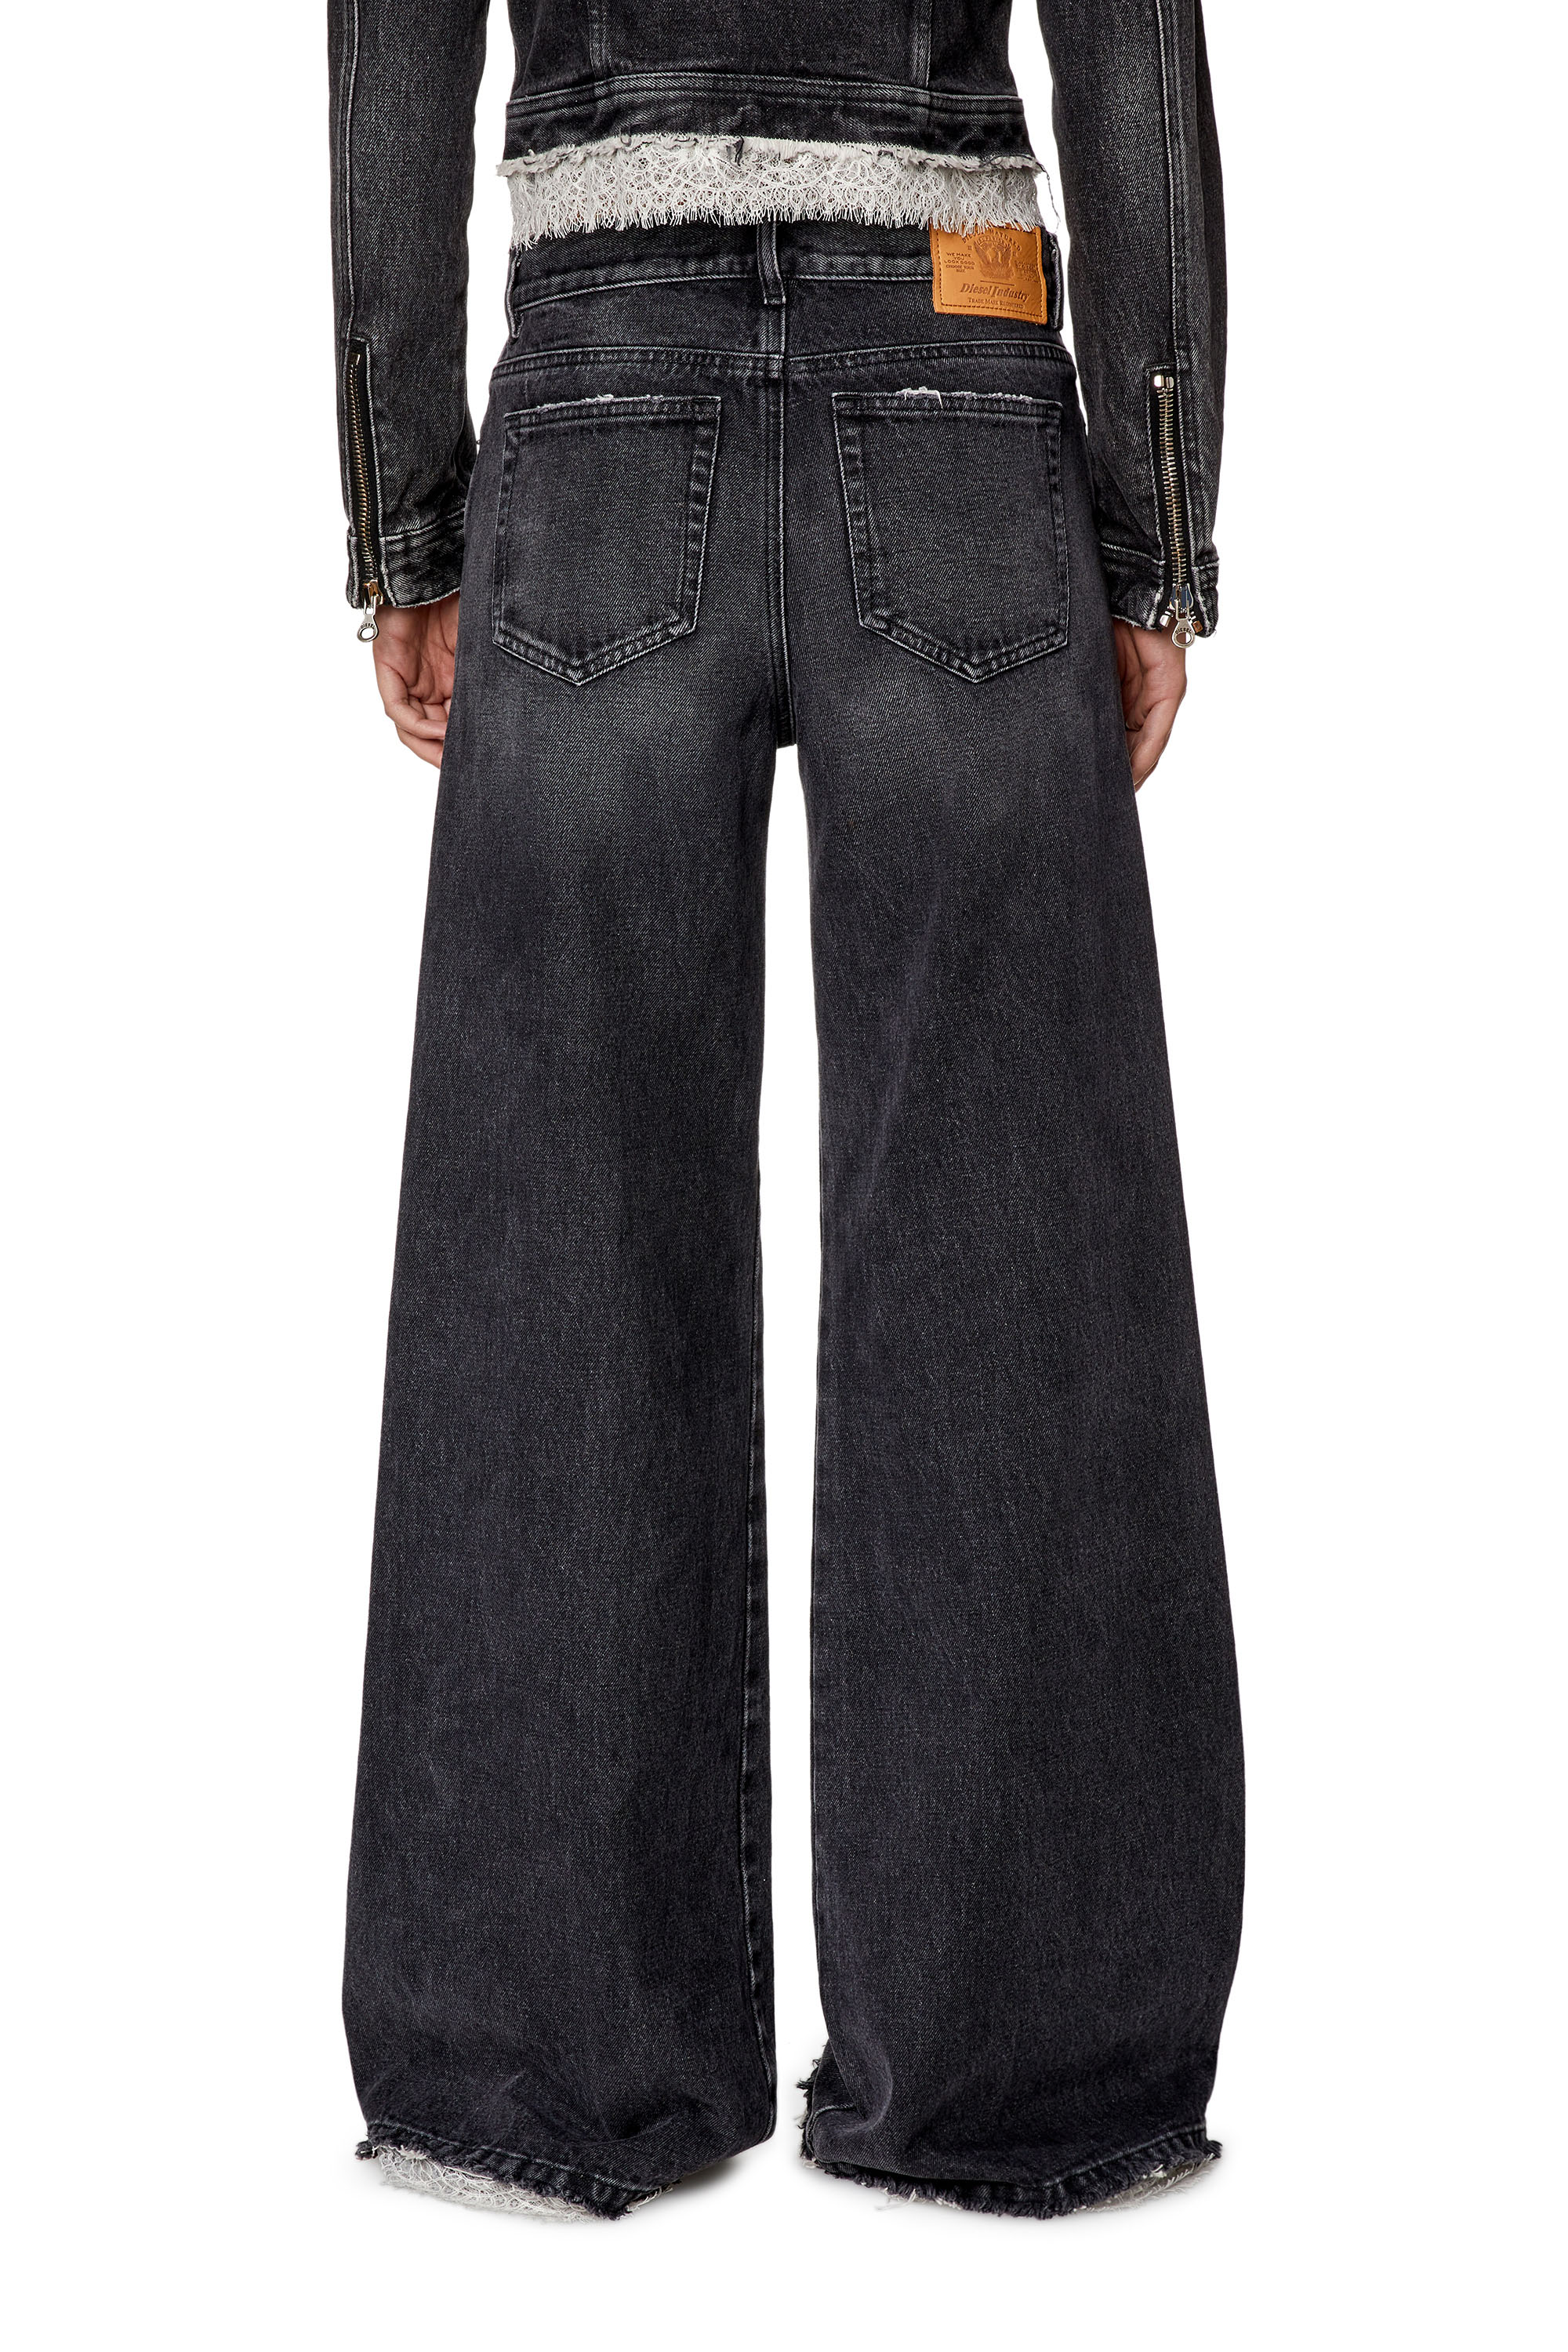 Bootcut and Flare Jeans 1978 D-Akemi 007S2